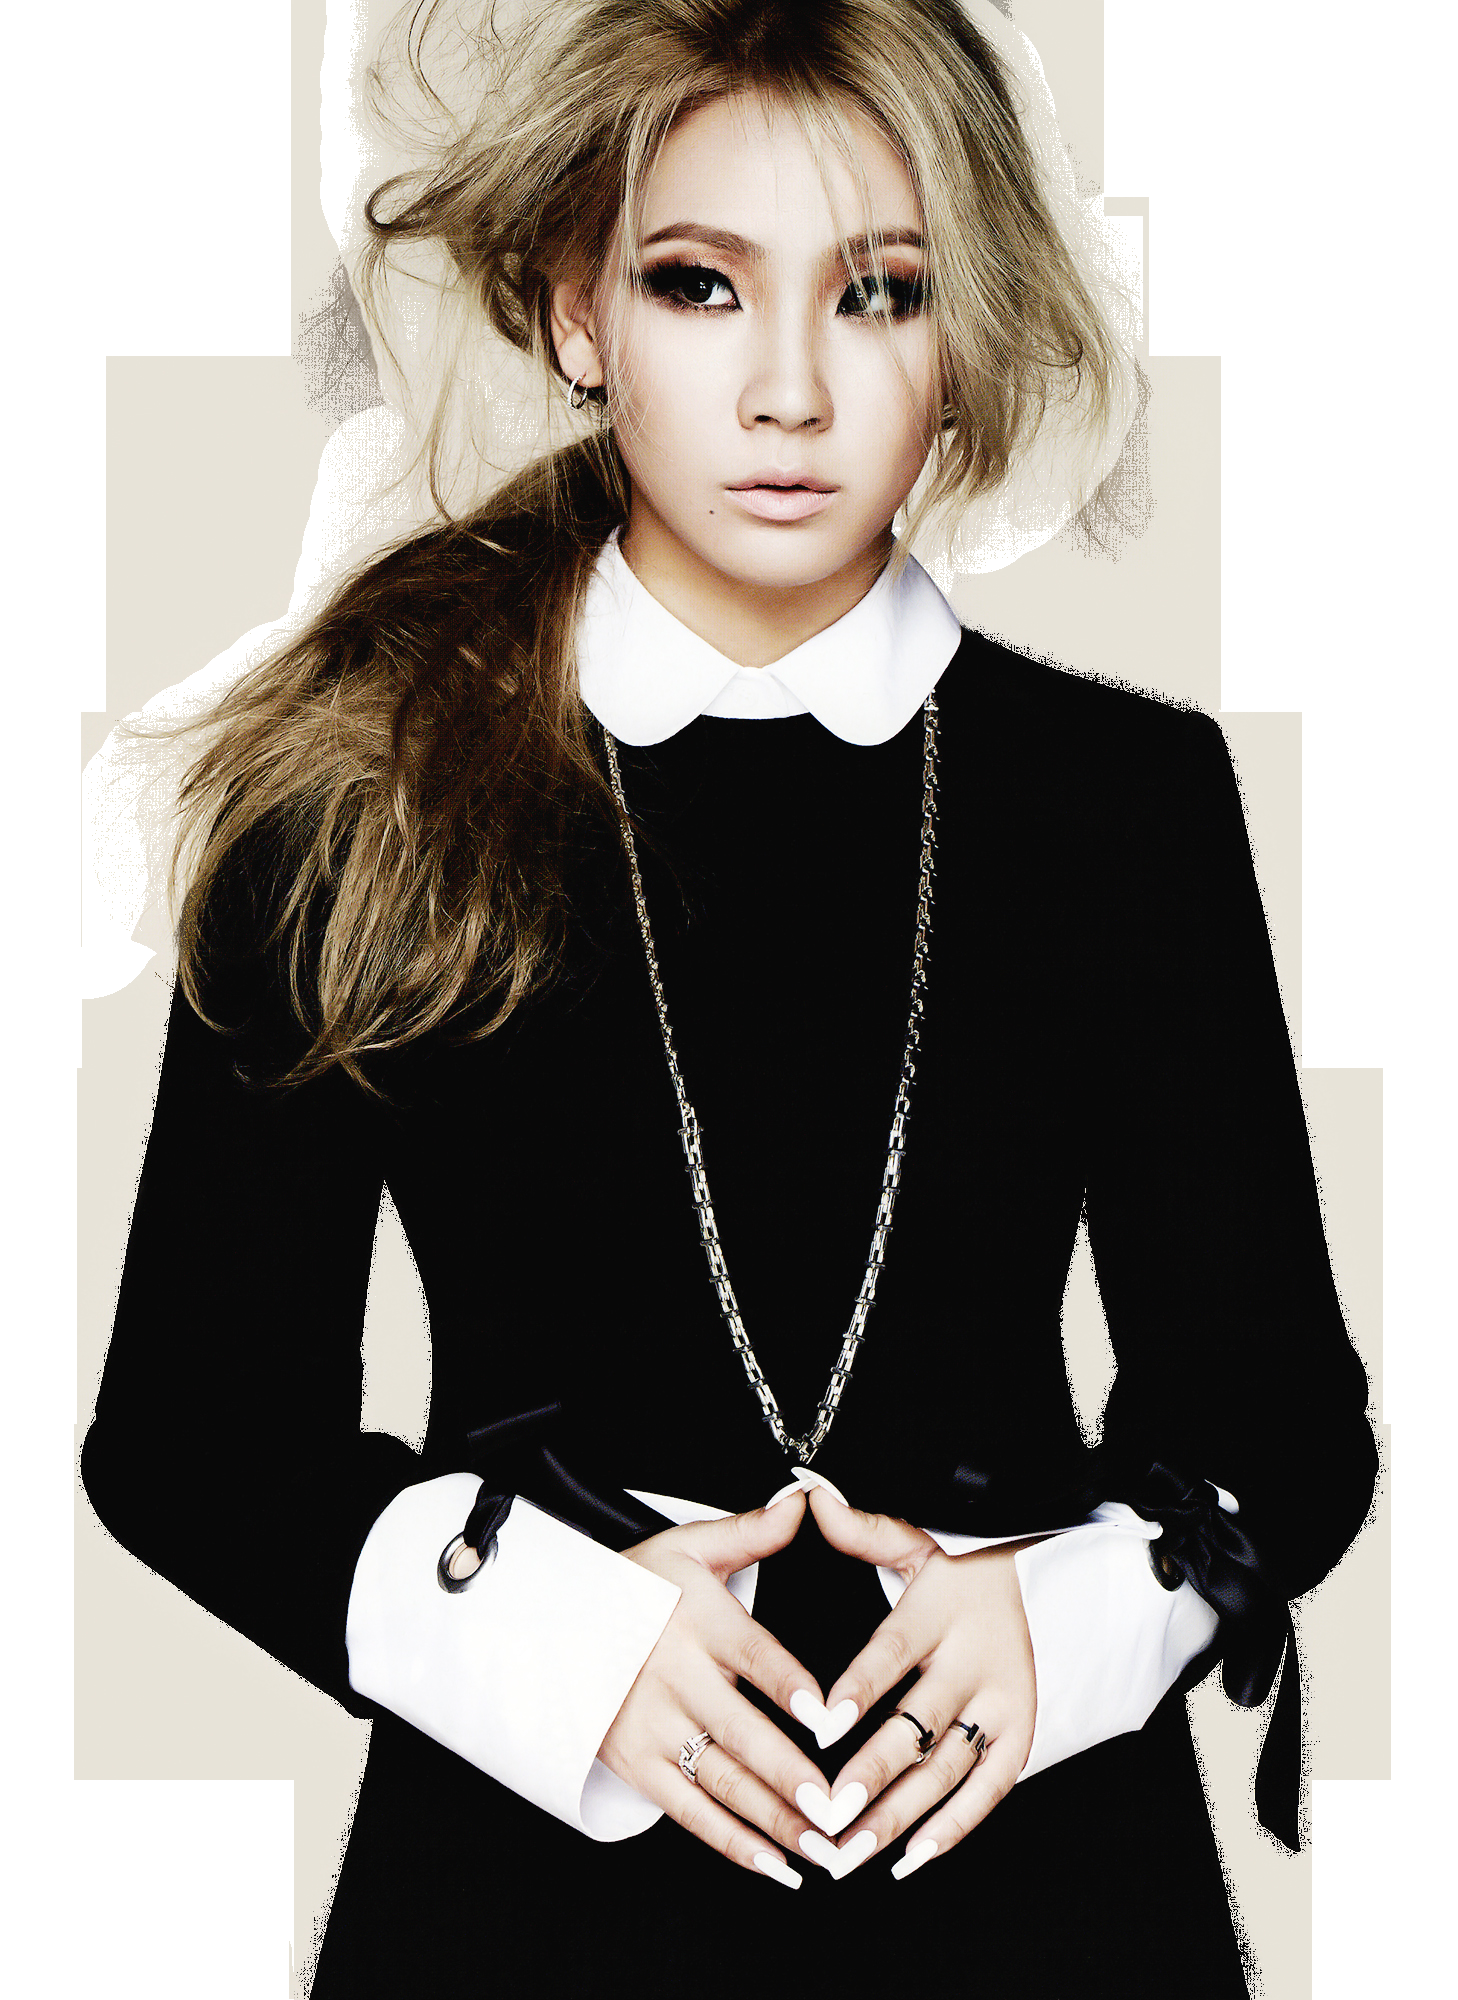 CL 2NE1 Young